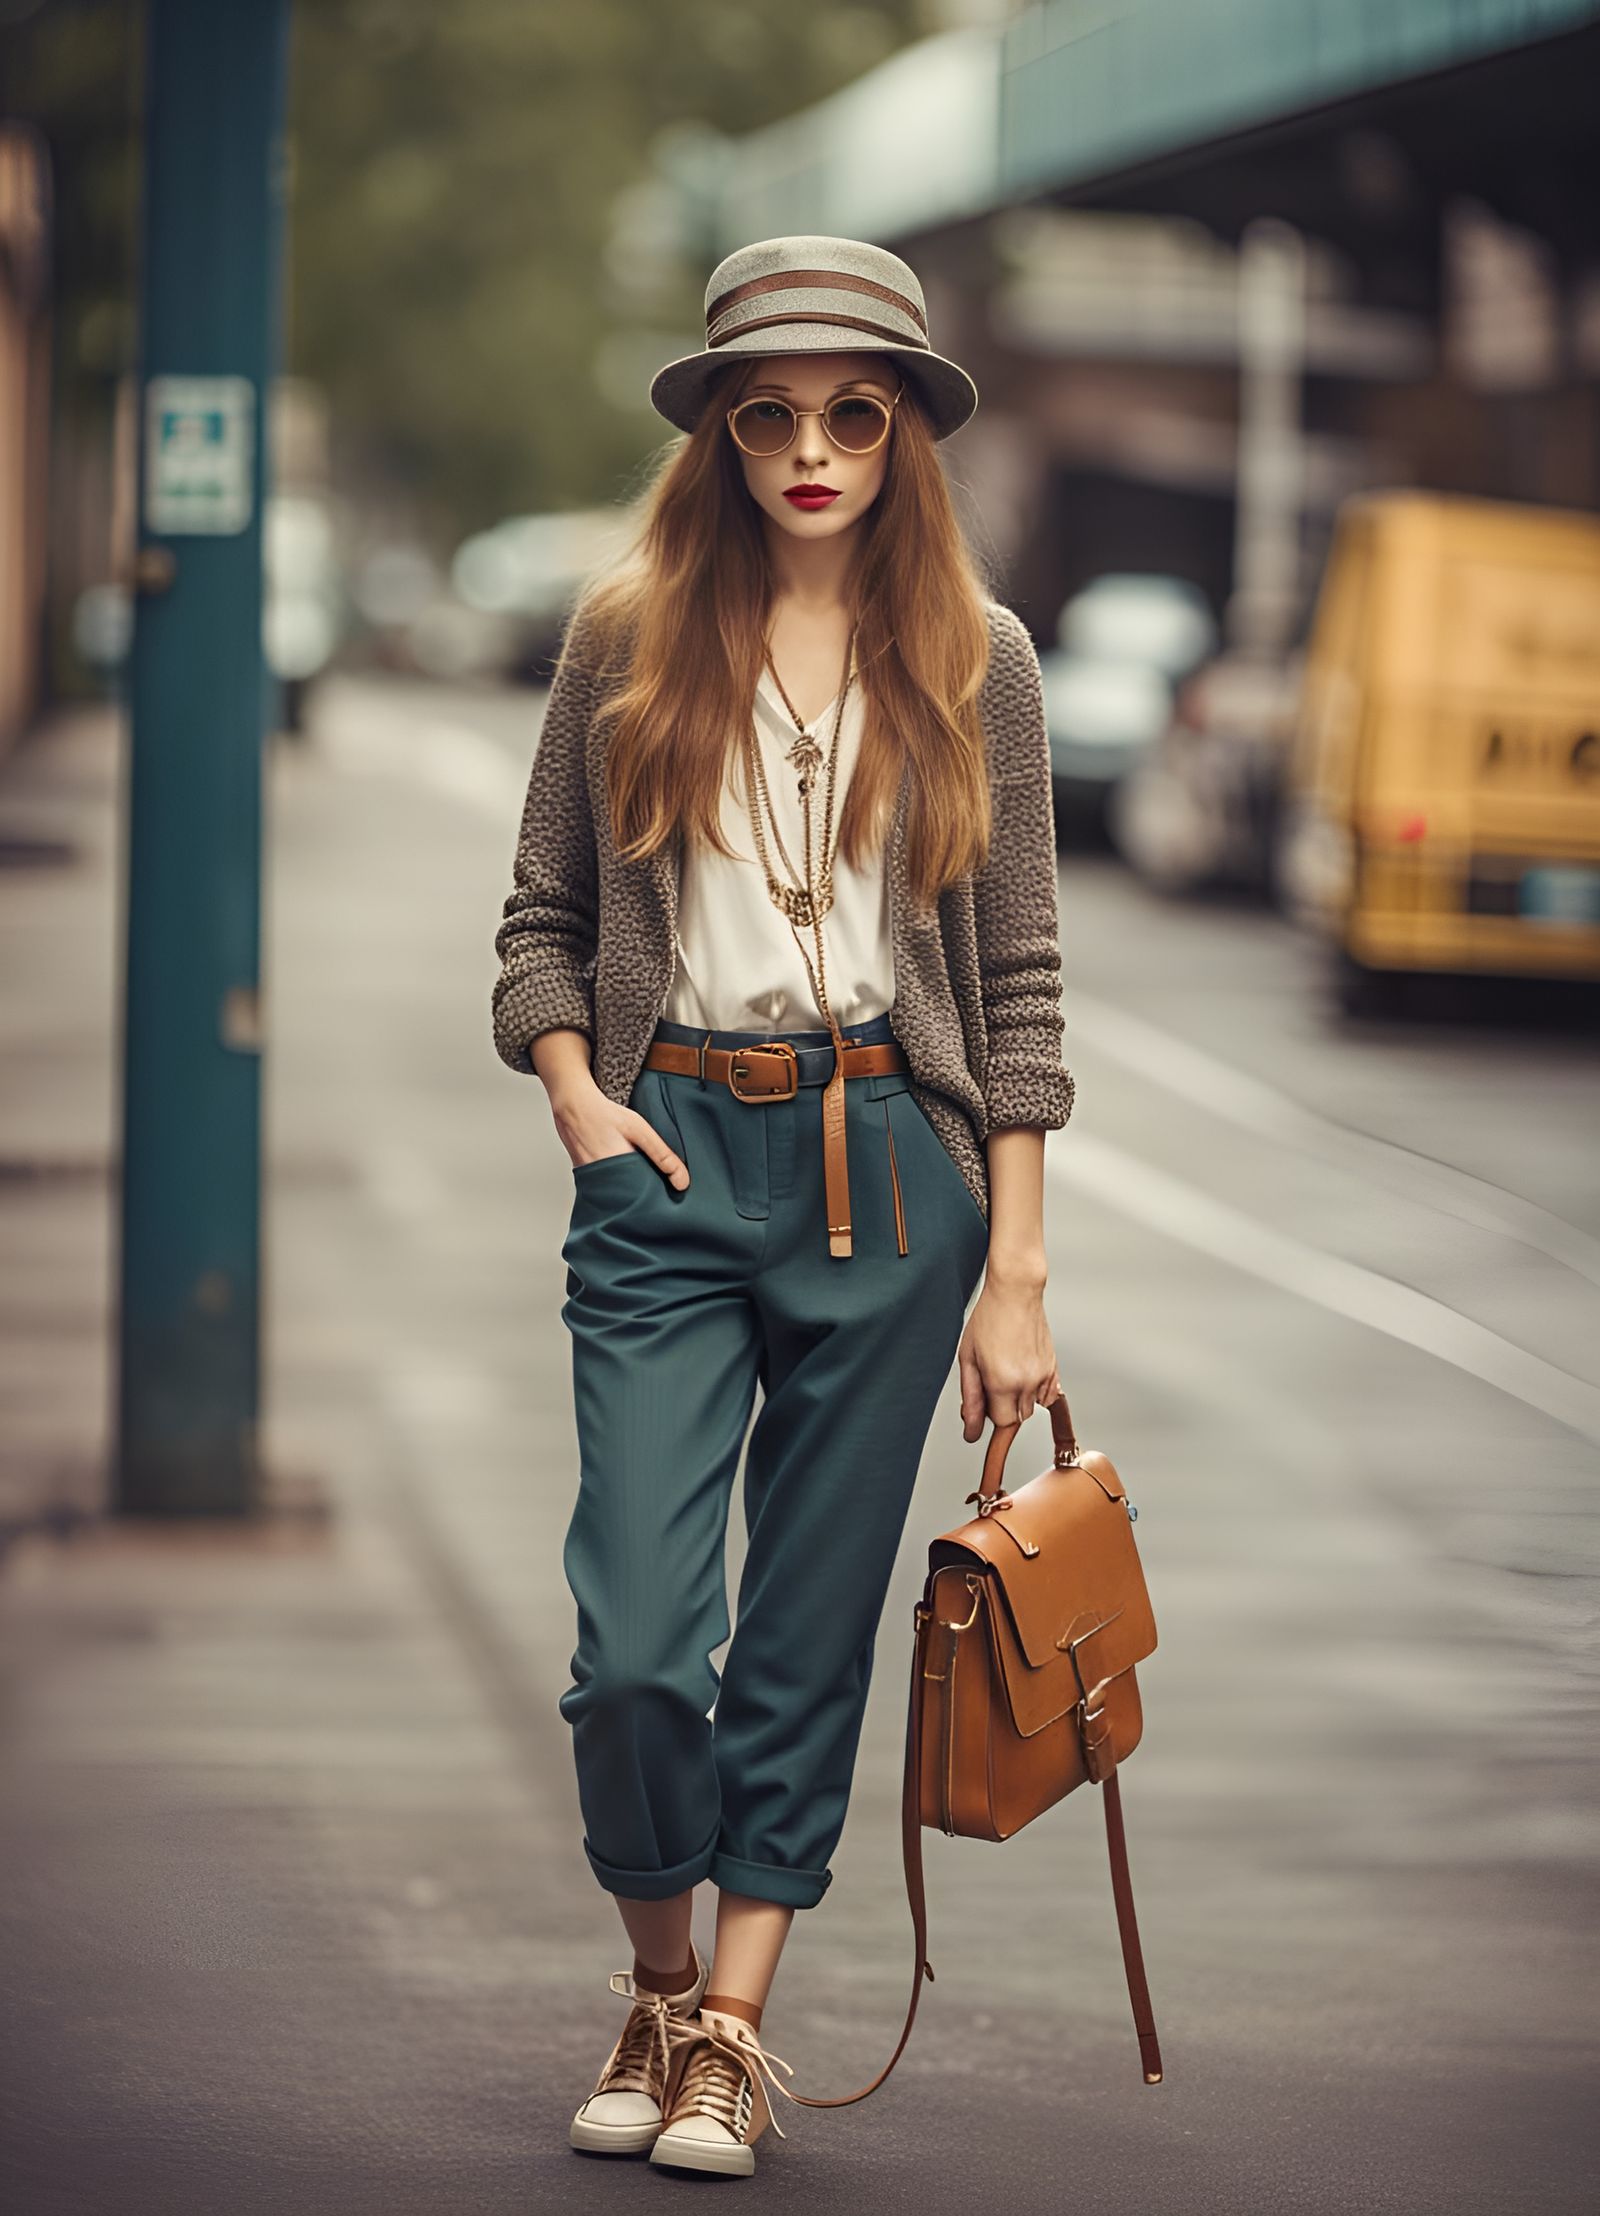 Hipster Outfits Photos and Images